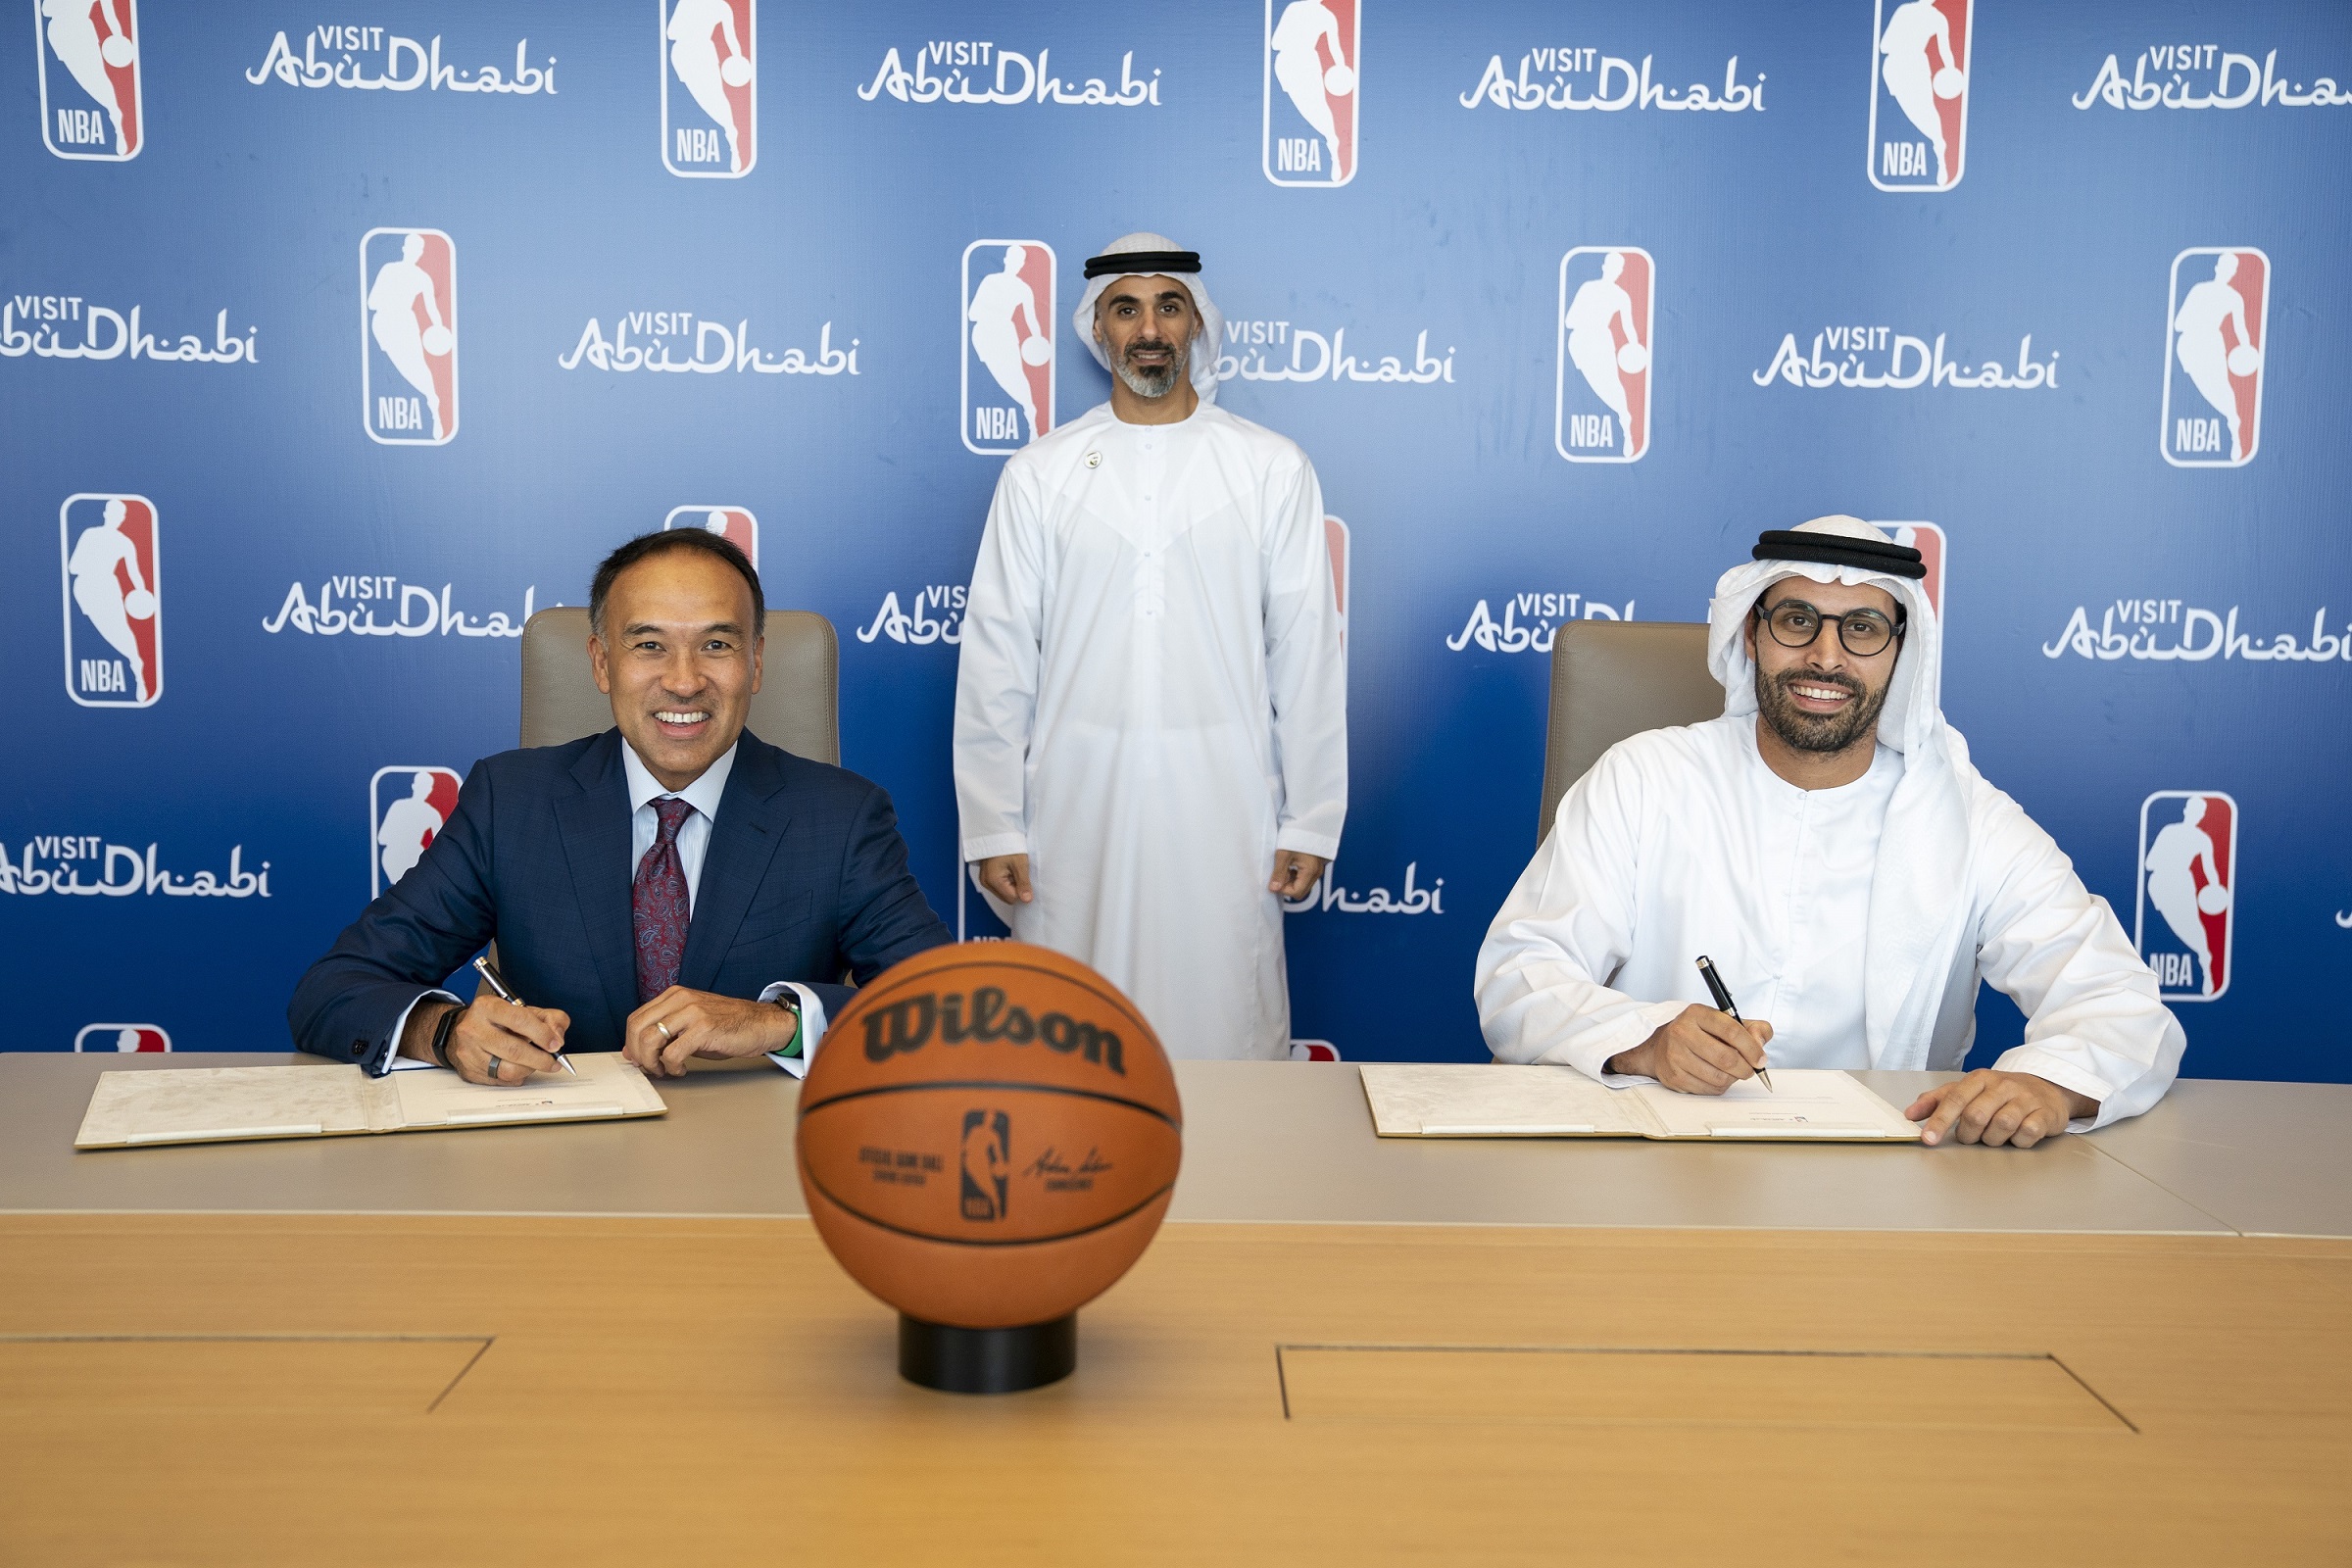 NBA And DCT Announce Multiyear Partnership To Host First NBA Games In The UAE